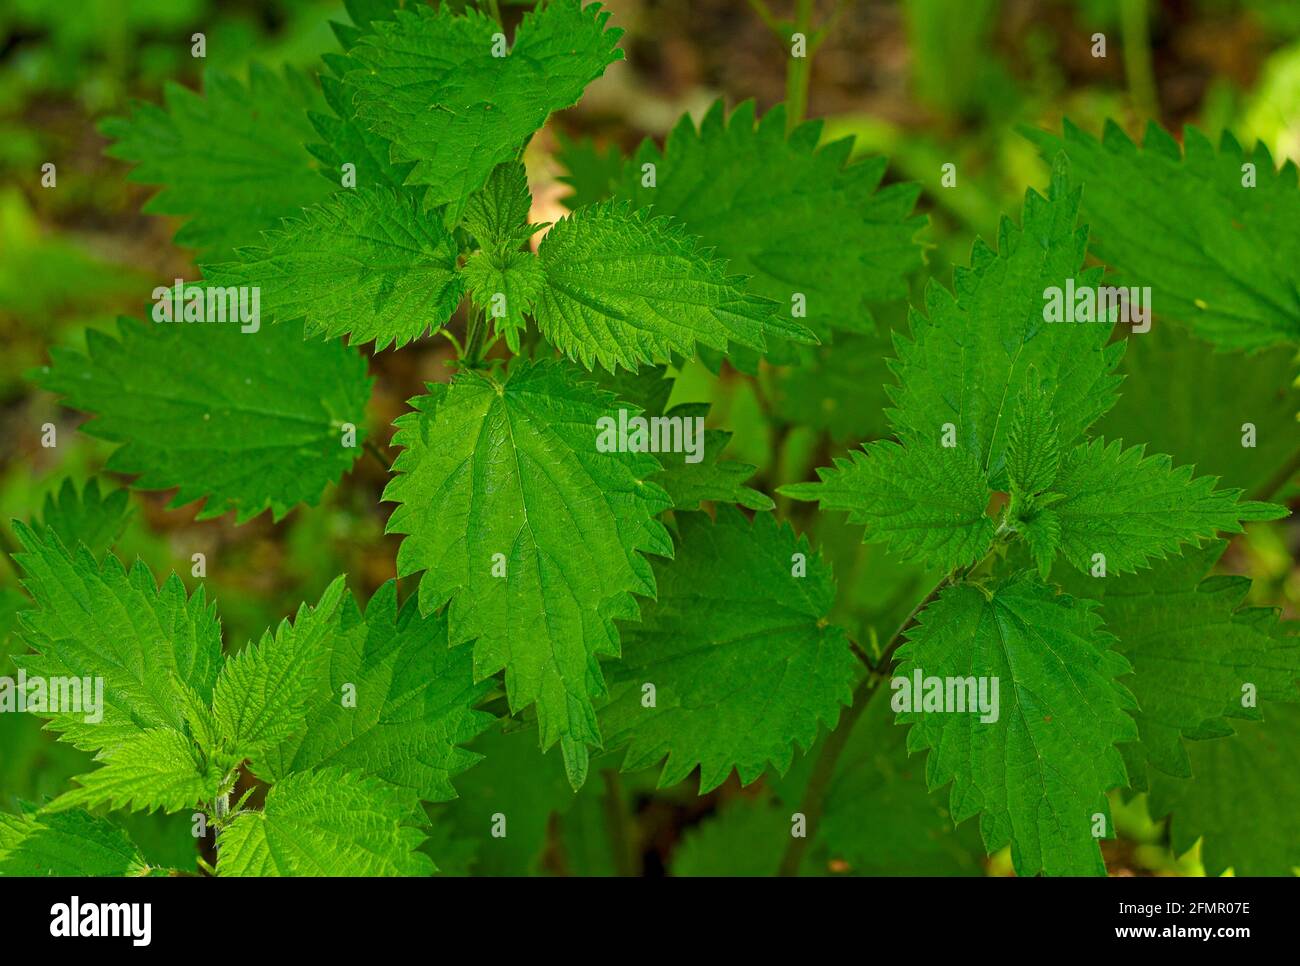 A background of bright green nettle leaves Stock Photo